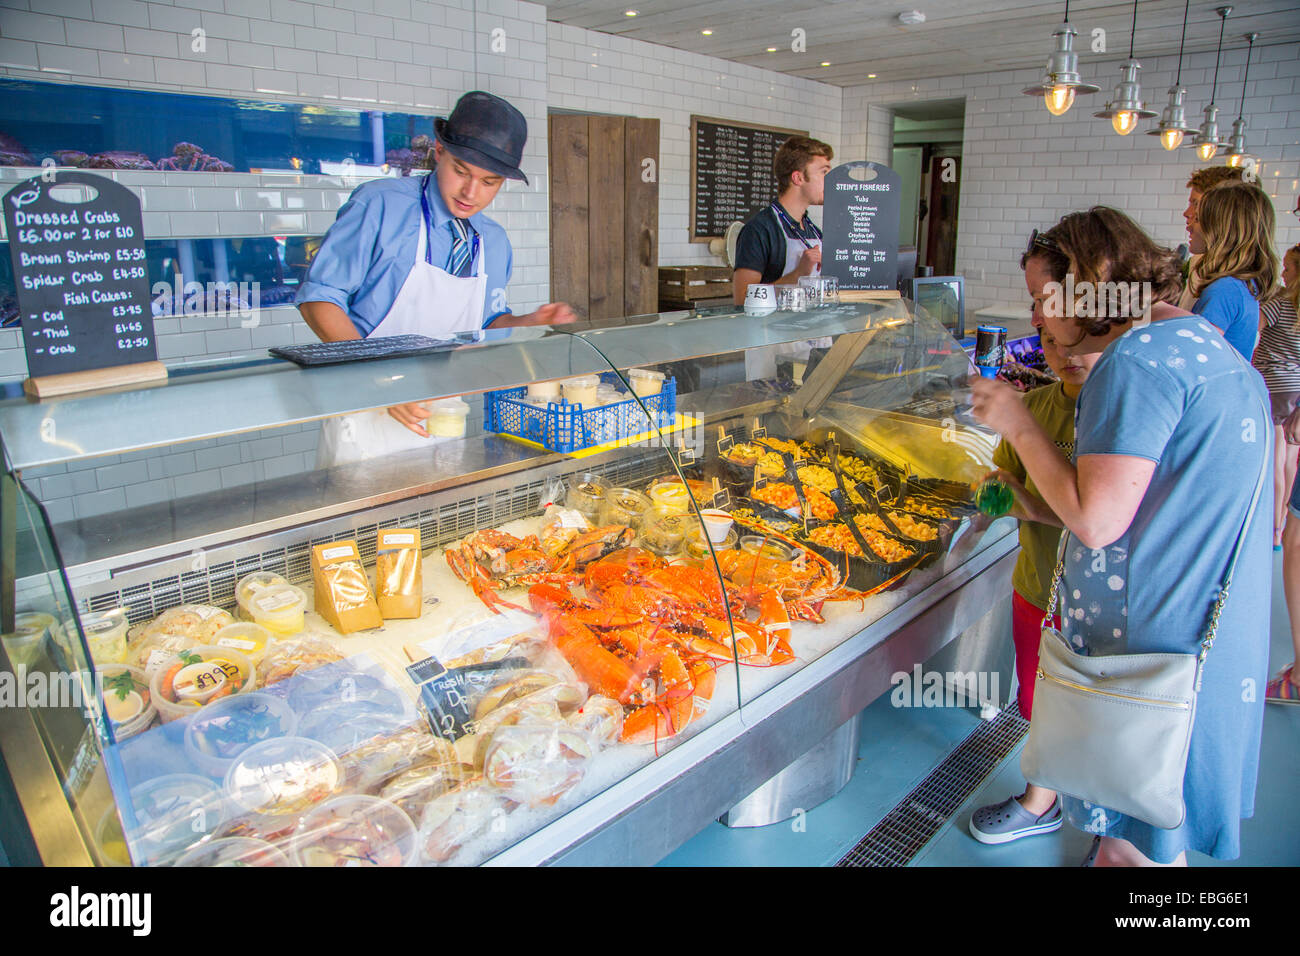 An Interior view of staff serving customers at Stein's Fisheries fresh fish counter Padstow Cornwall England UK Stock Photo